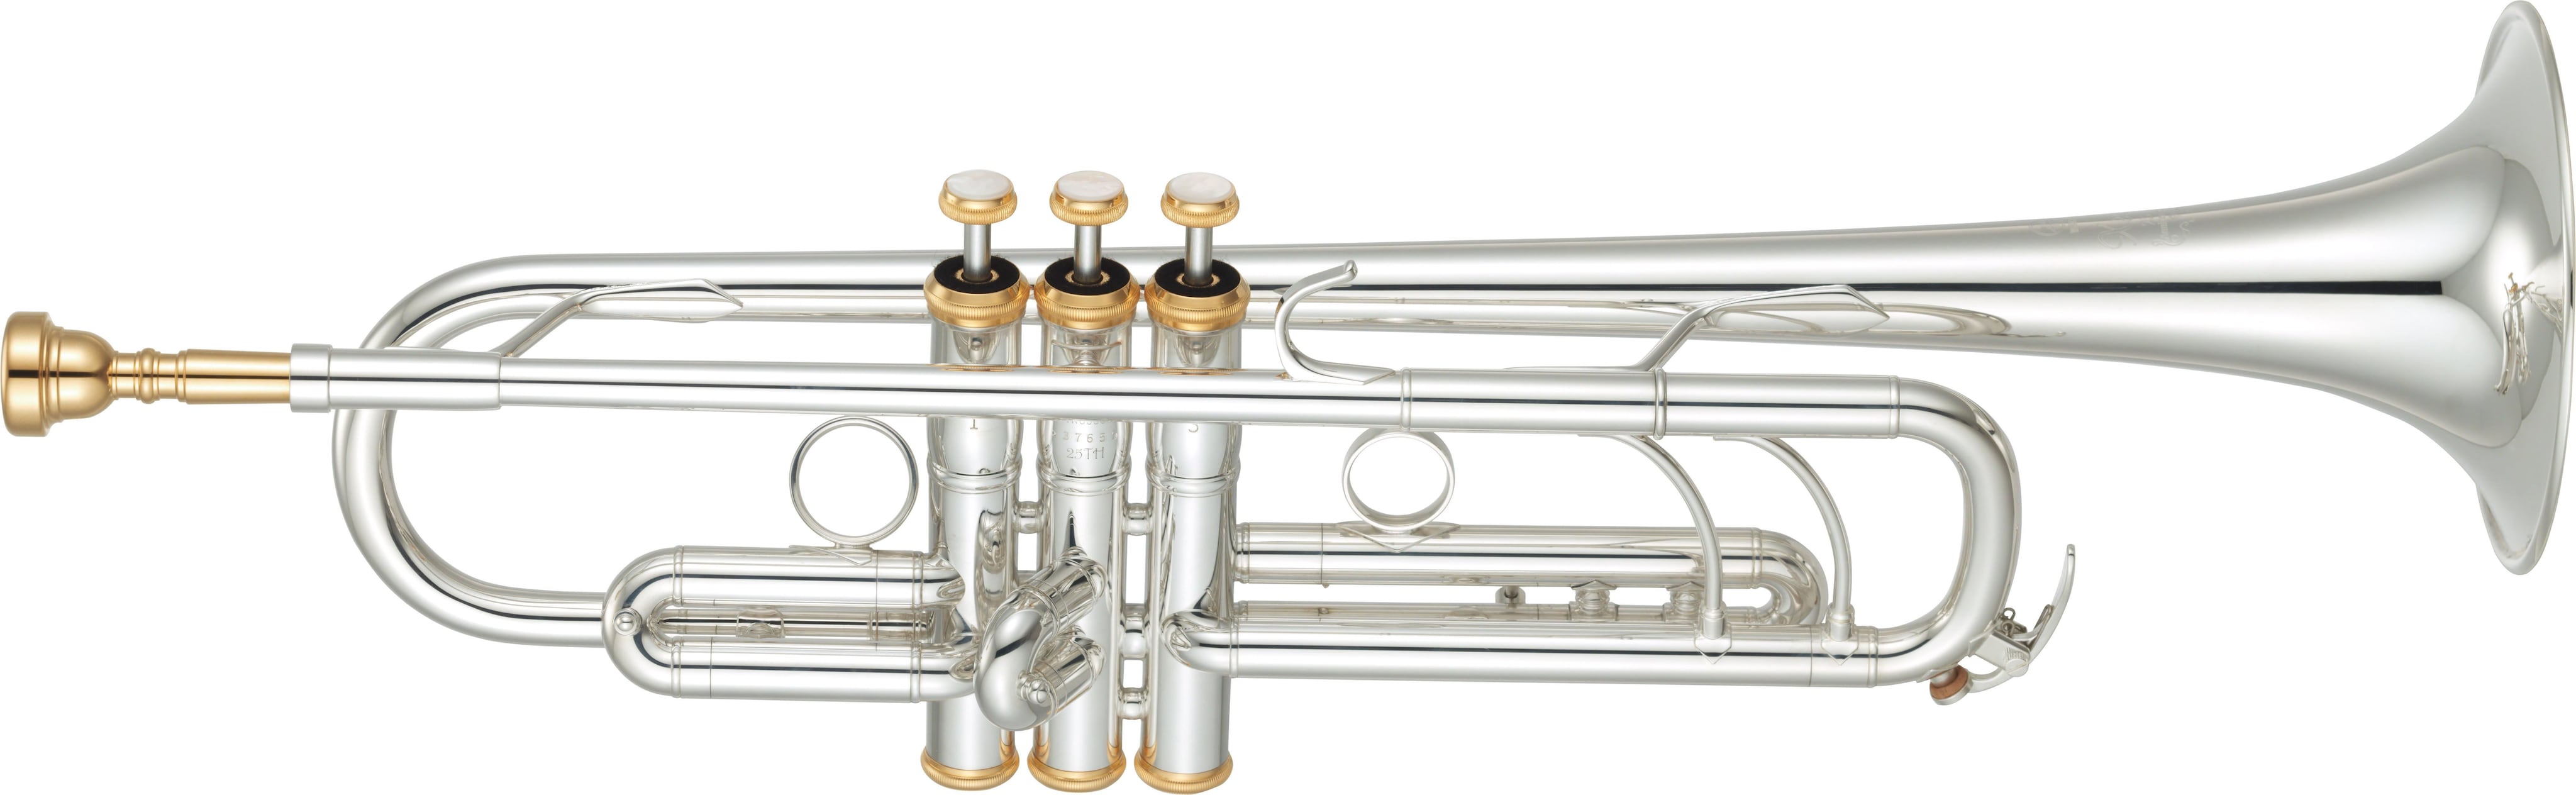 YTR-8335RS25TH - Features - Bb Trumpets - Trumpets - Brass 